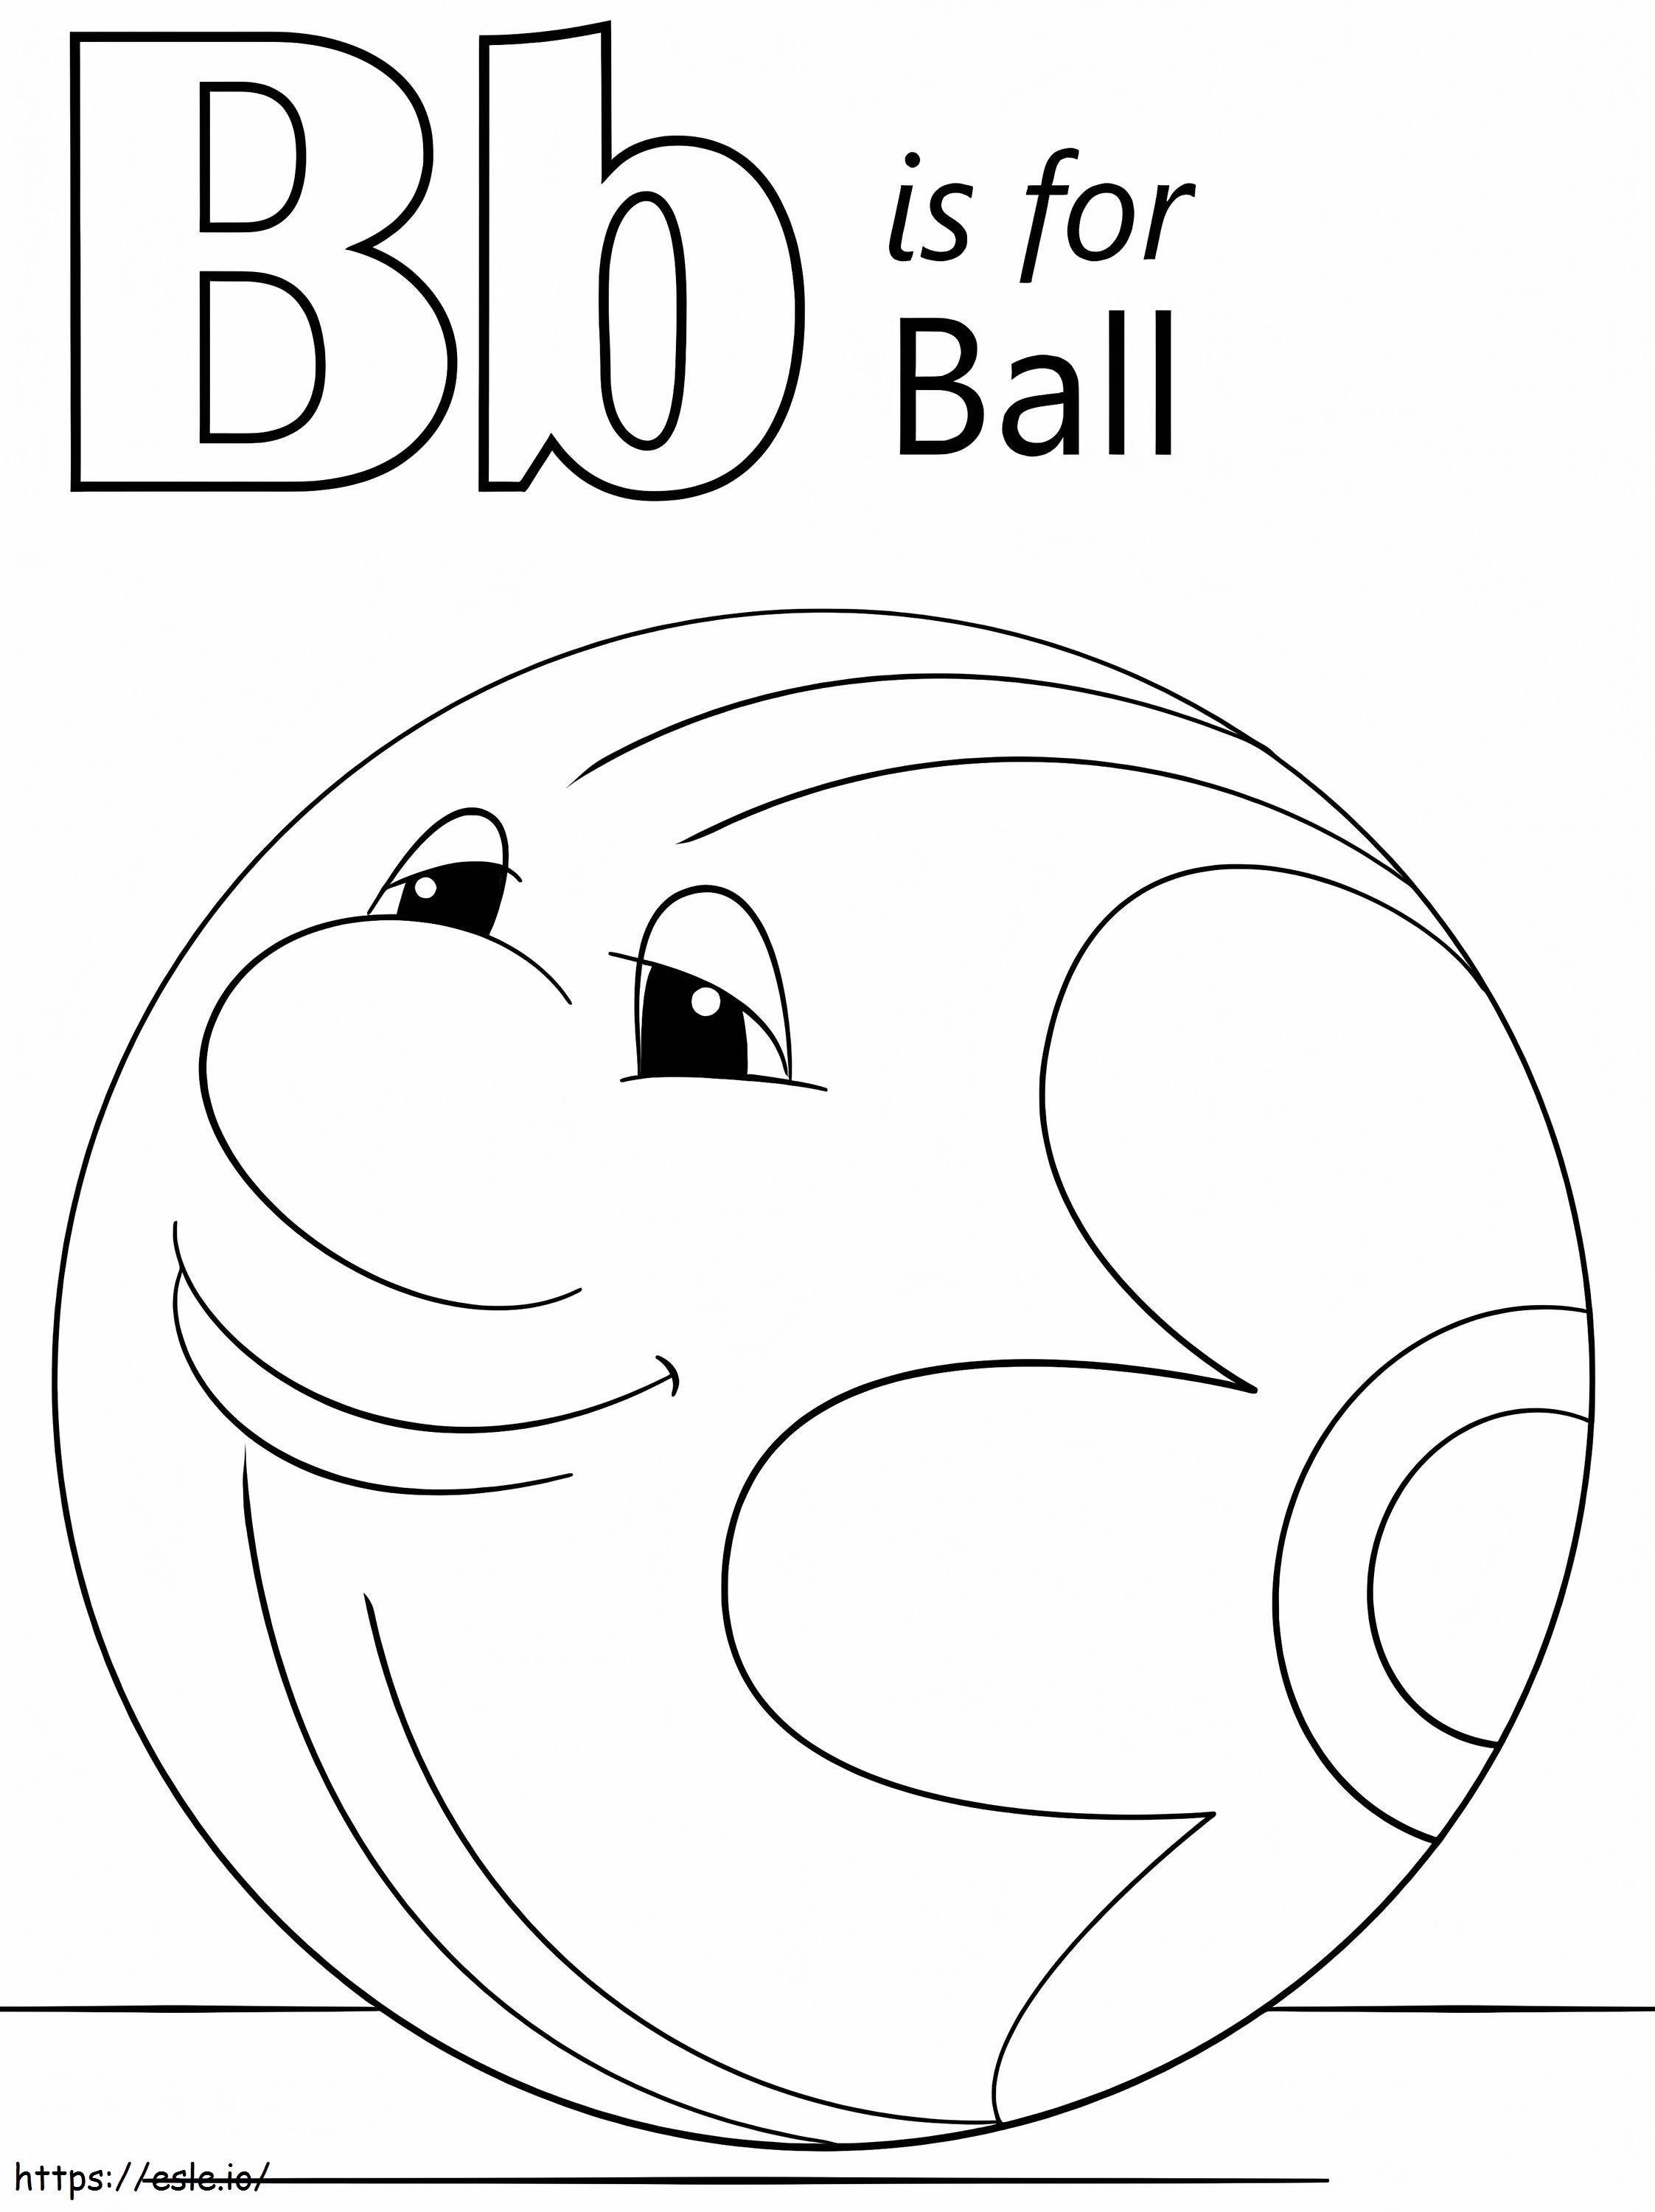 Ball Letter B coloring page